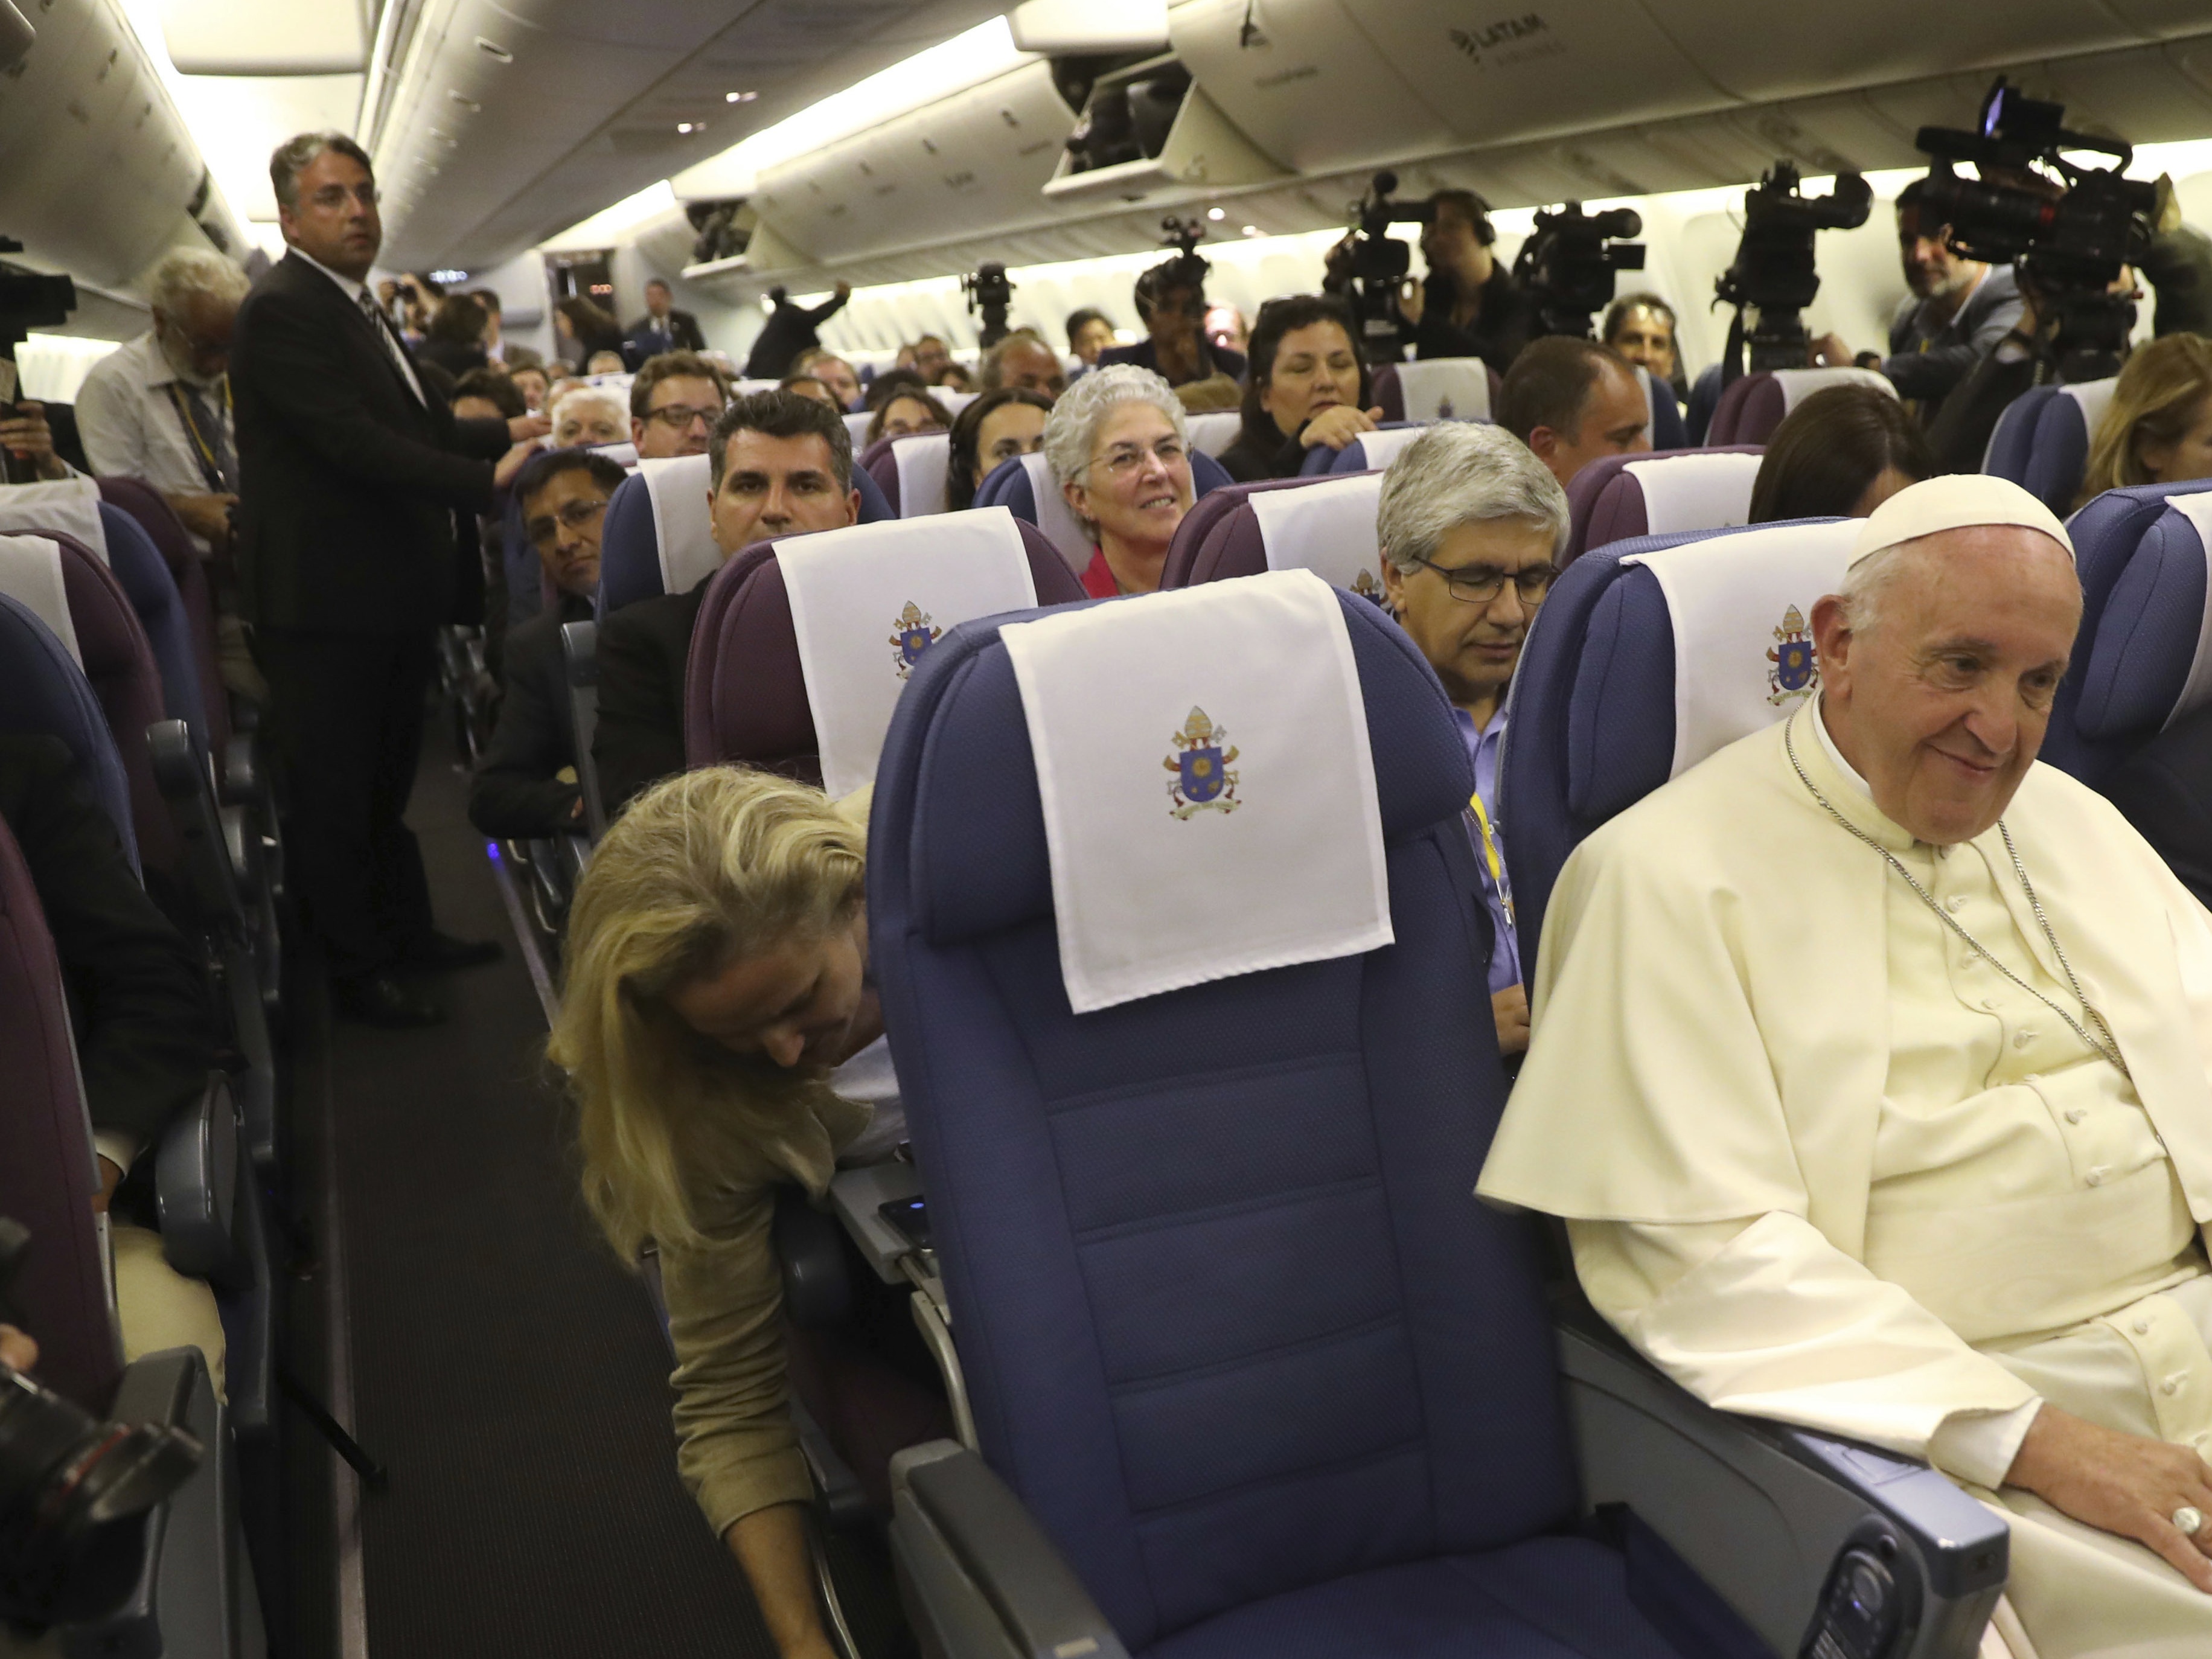 Pope Francis sitting with journalists during some mid-flight turbulence (Alessandra Tarantino/AP)